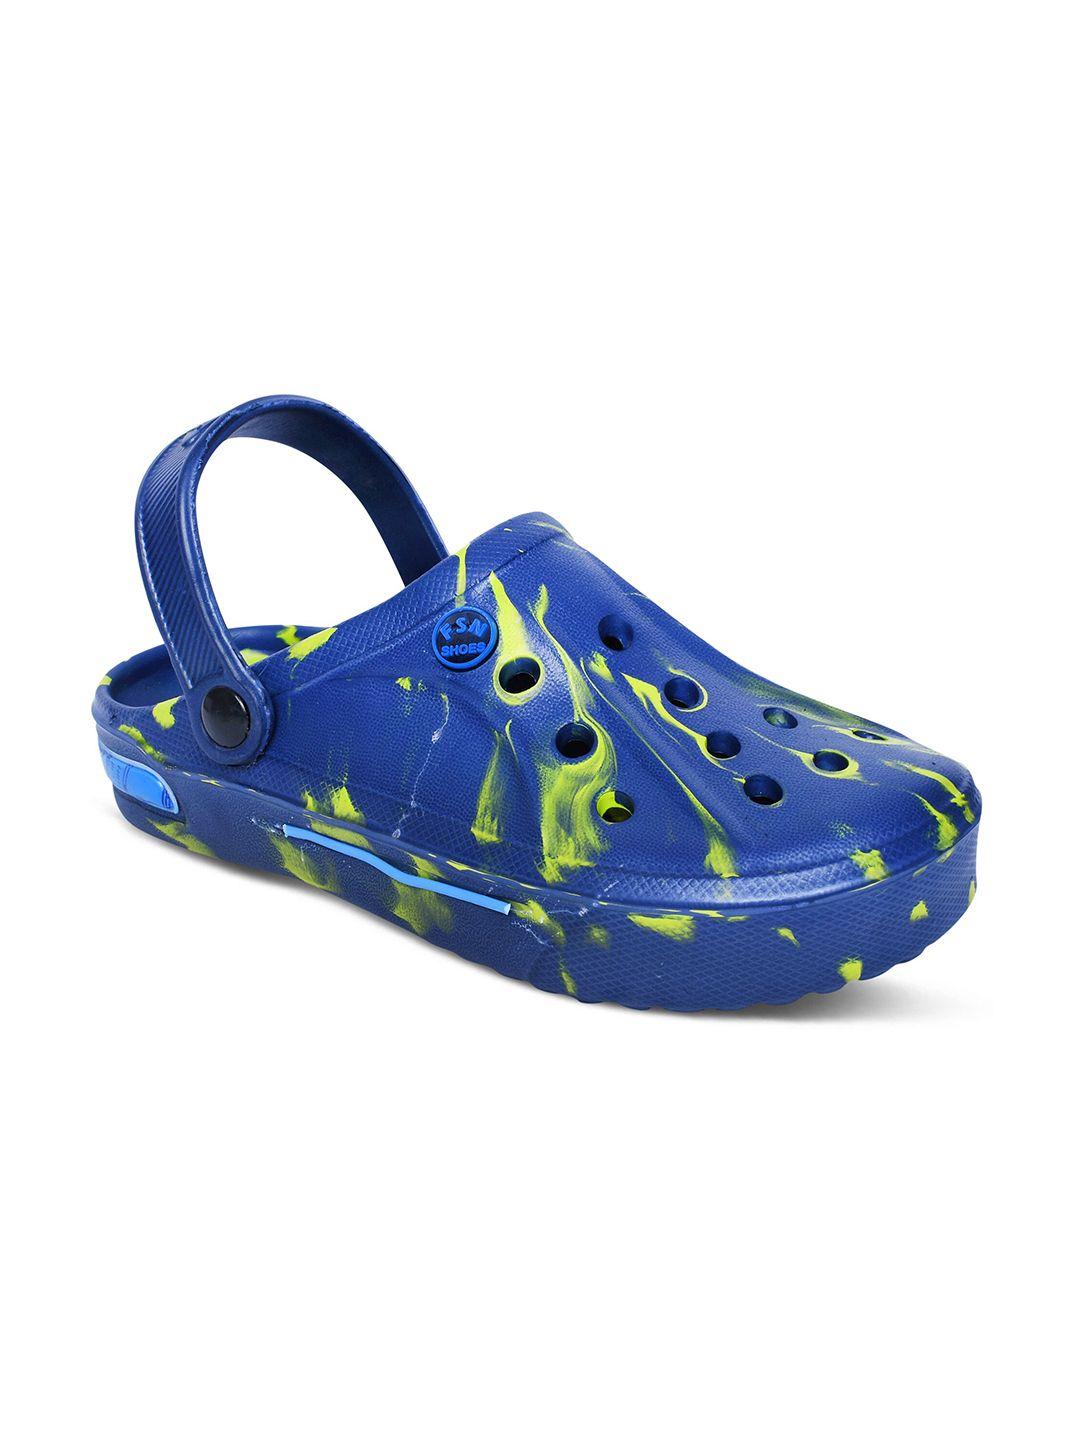 airspot unisex printed clogs